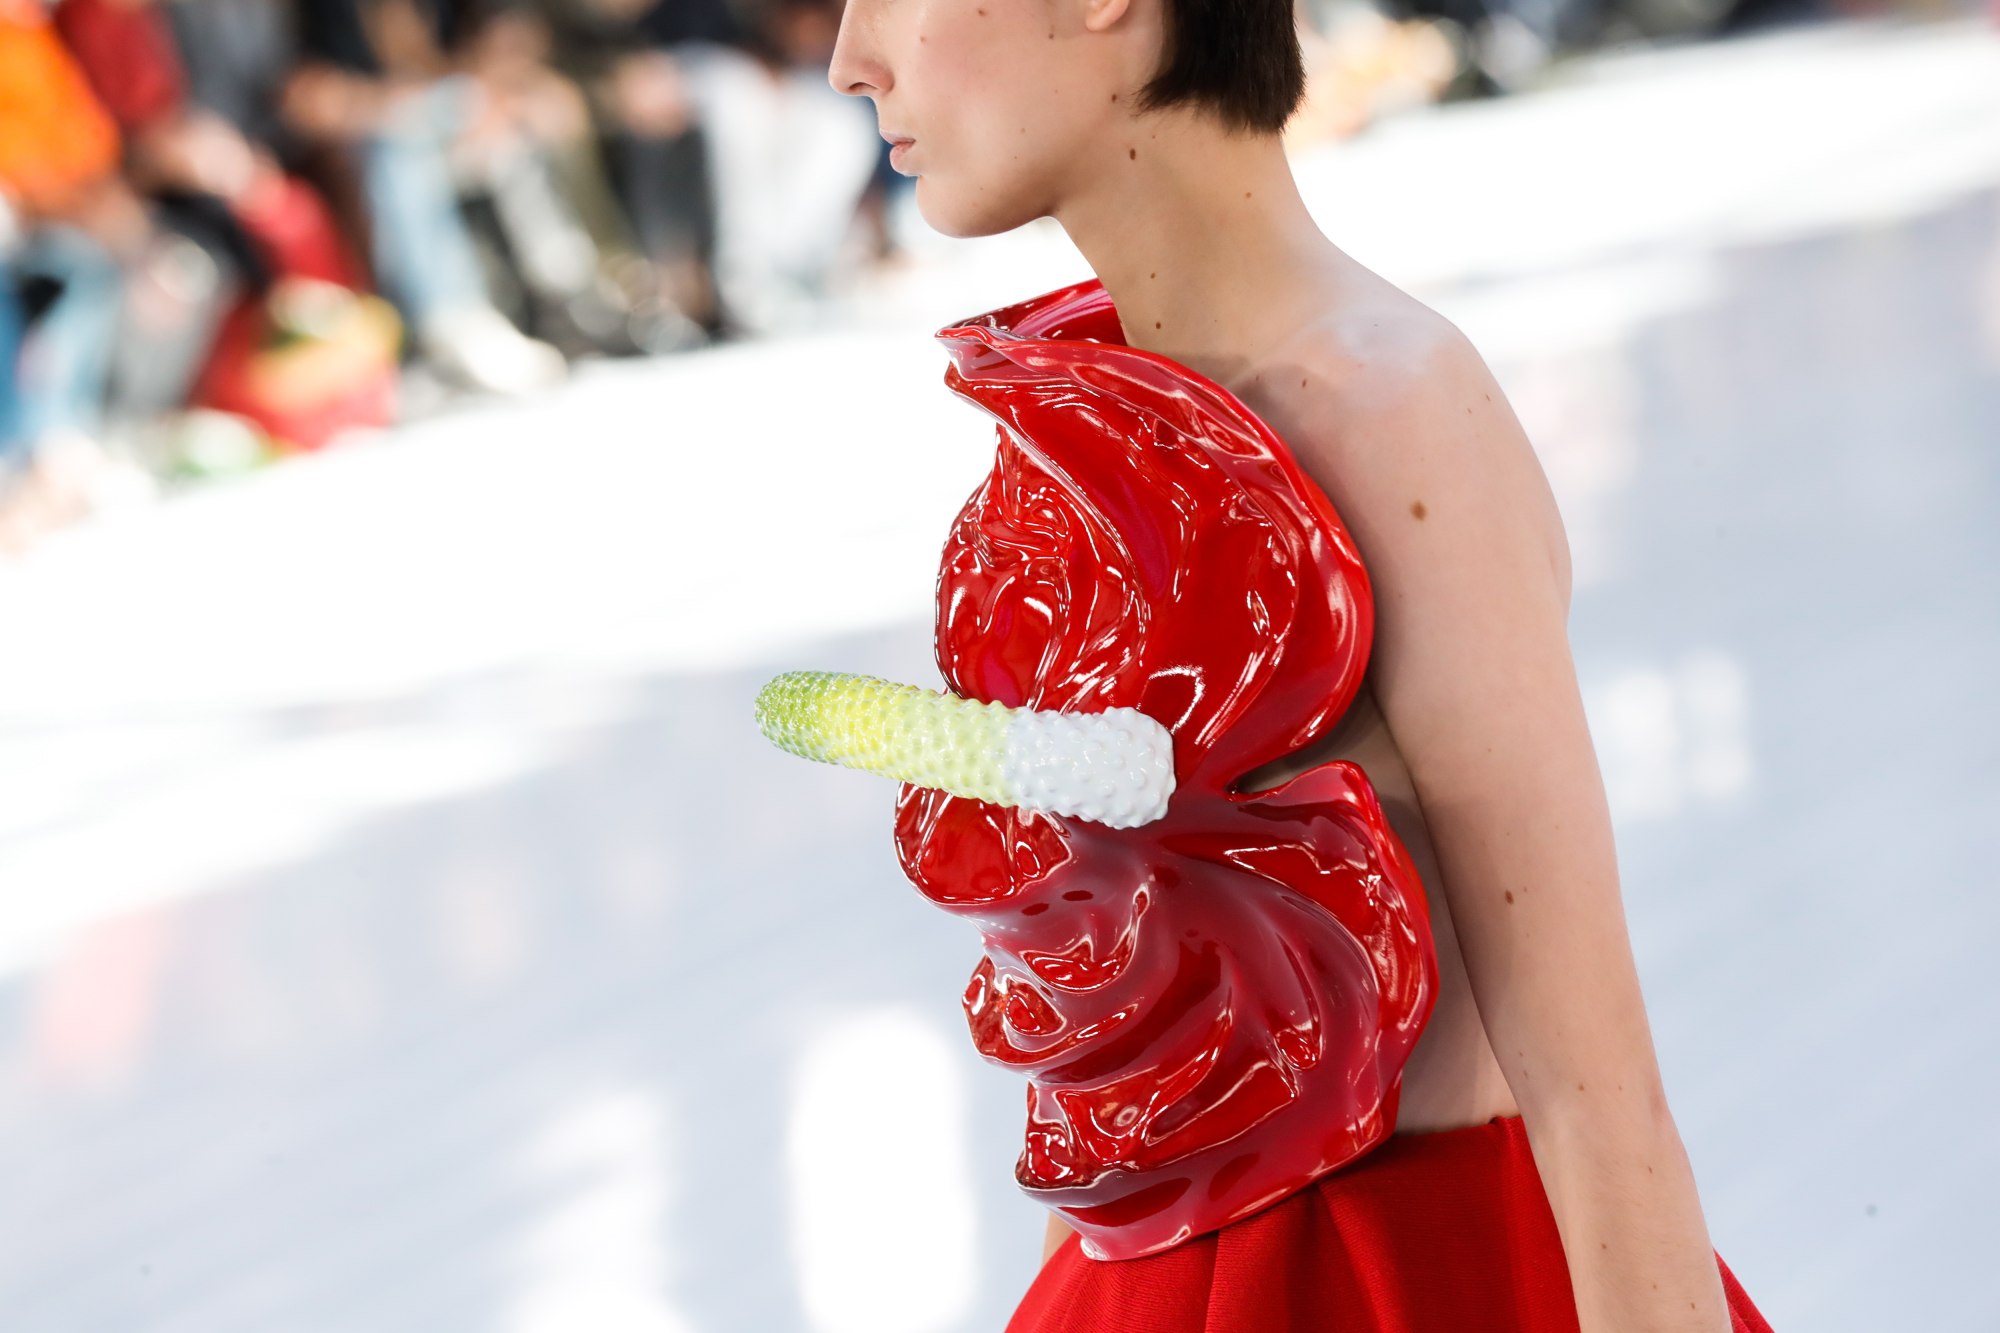 Paris Fashion Week: Loewe brings a whimsical floral theme for spring/summer  2023, with Jonathan Anderson's giant anthurium dresses and 'petal' heels  winning over Karlie Kloss and Alexa Chung